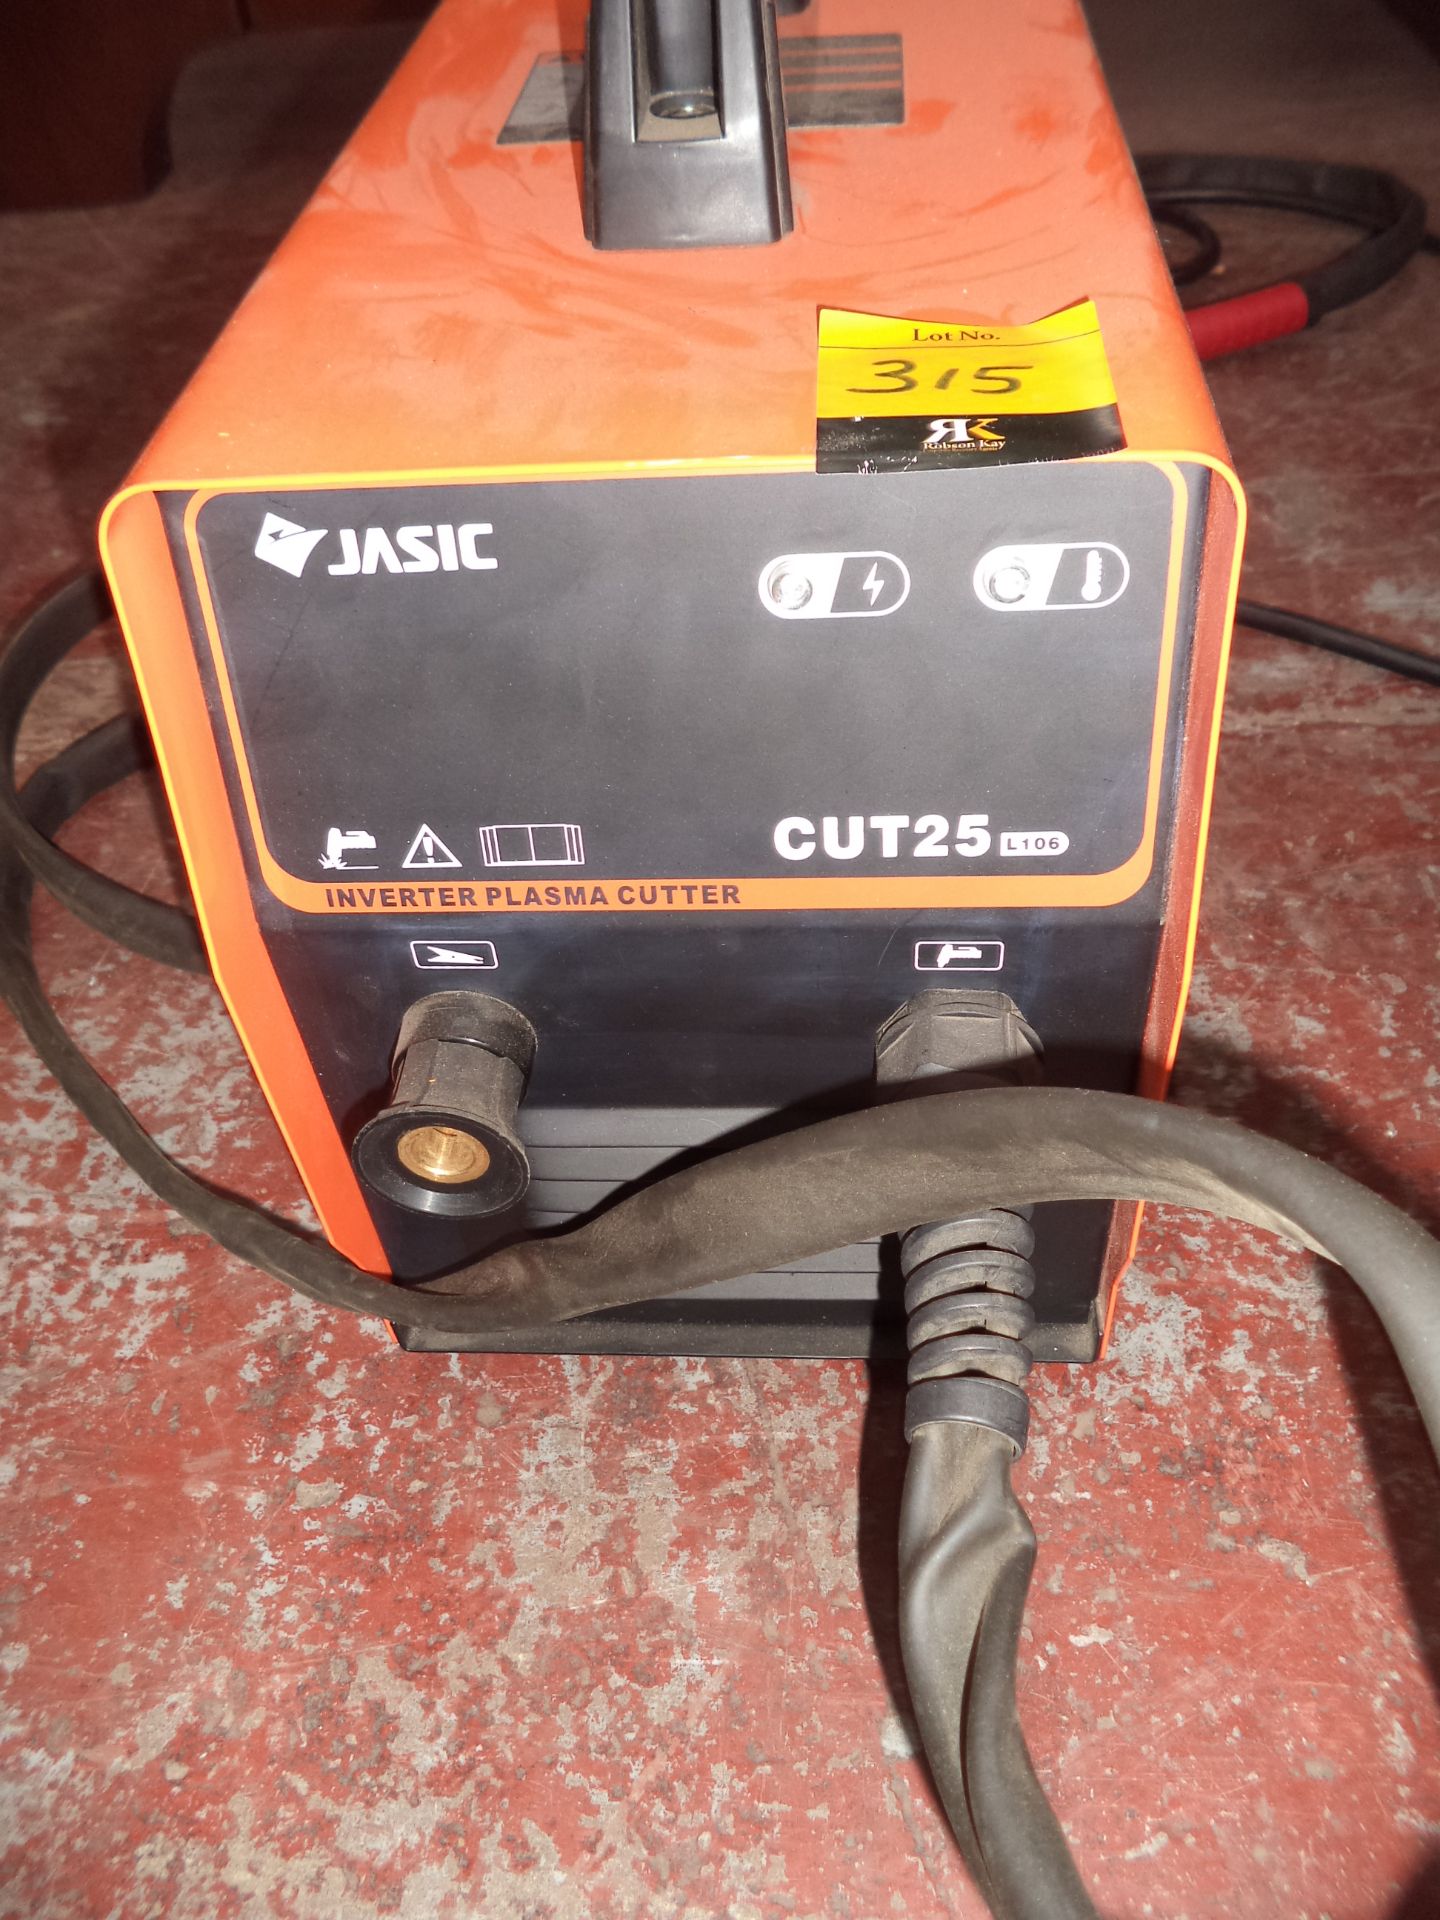 Jasic cut 25L106 plasma cutter IMPORTANT: Please remember goods successfully bid upon must be paid - Image 2 of 3